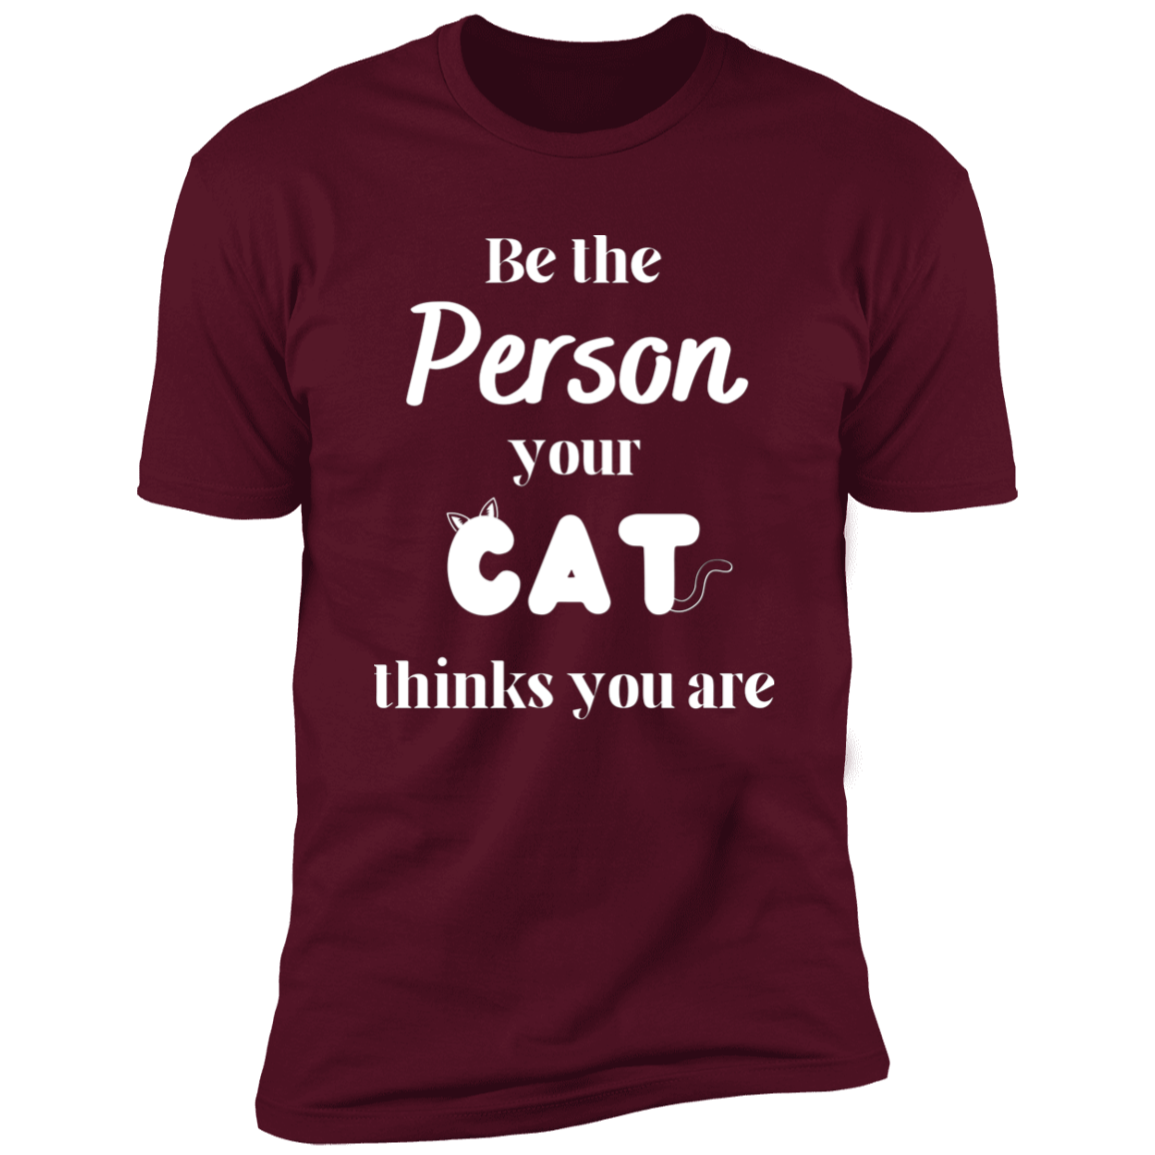 Be the Person Your Cat Thinks You Are T-shirt, Cat Shirt for humans, in maroon